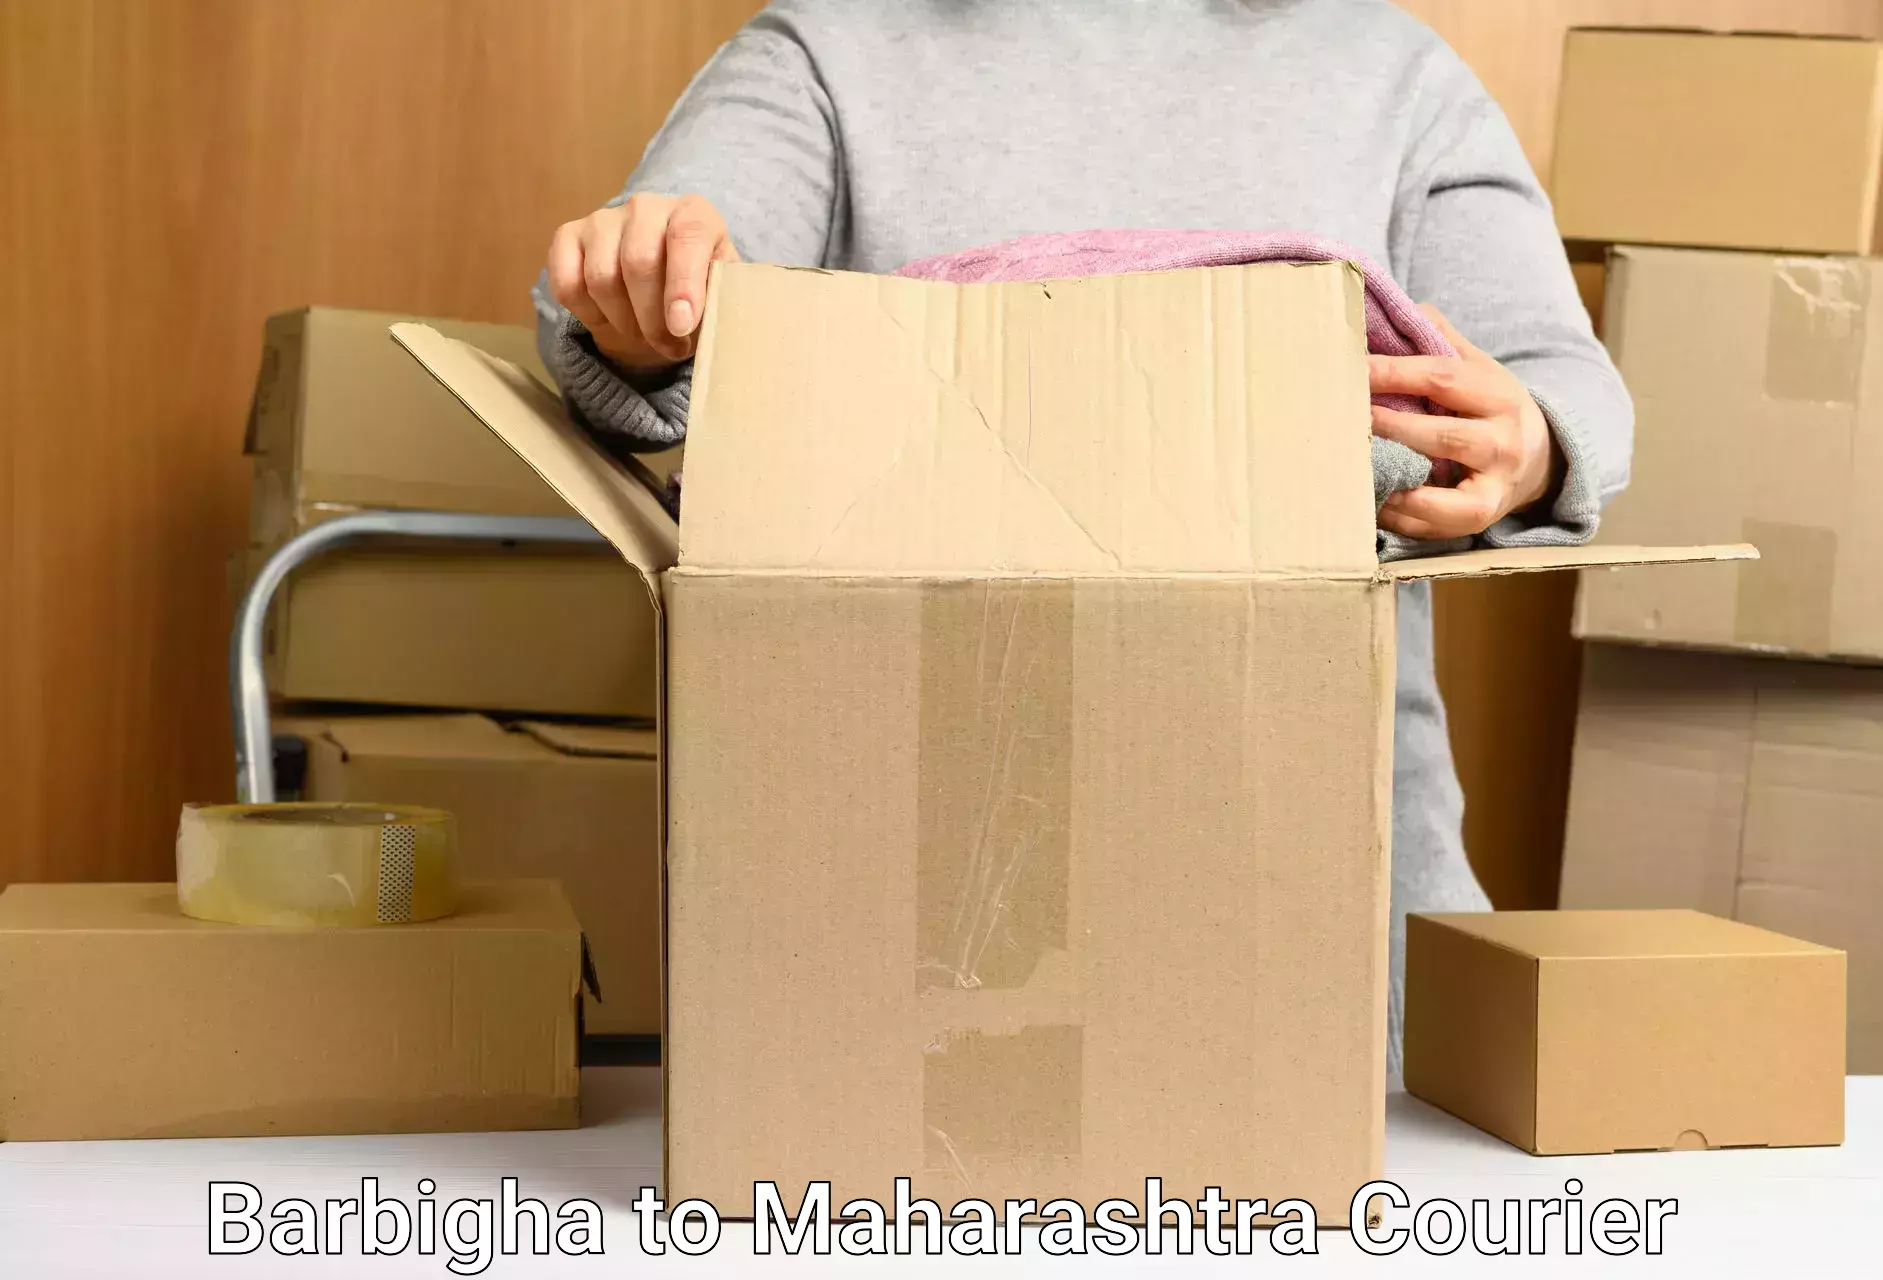 Reliable courier services in Barbigha to Khandala Pune